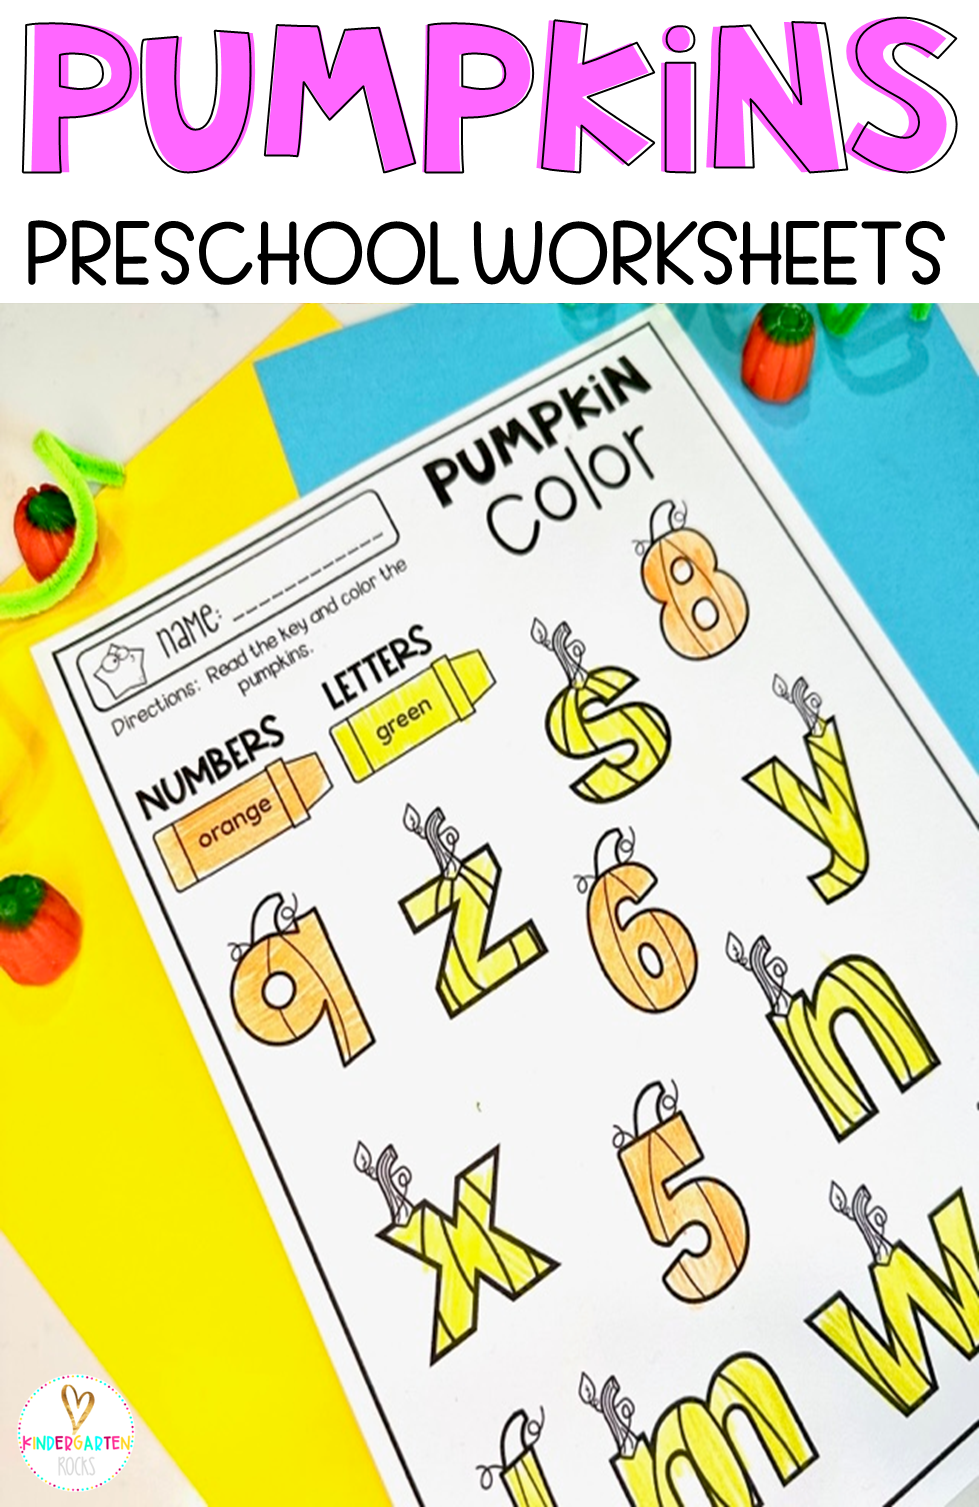 Pumpkin Math and Literacy Worksheets and Printables for Preschool is perfect for your preschool classroom. The boys and girls will color by letter or number.